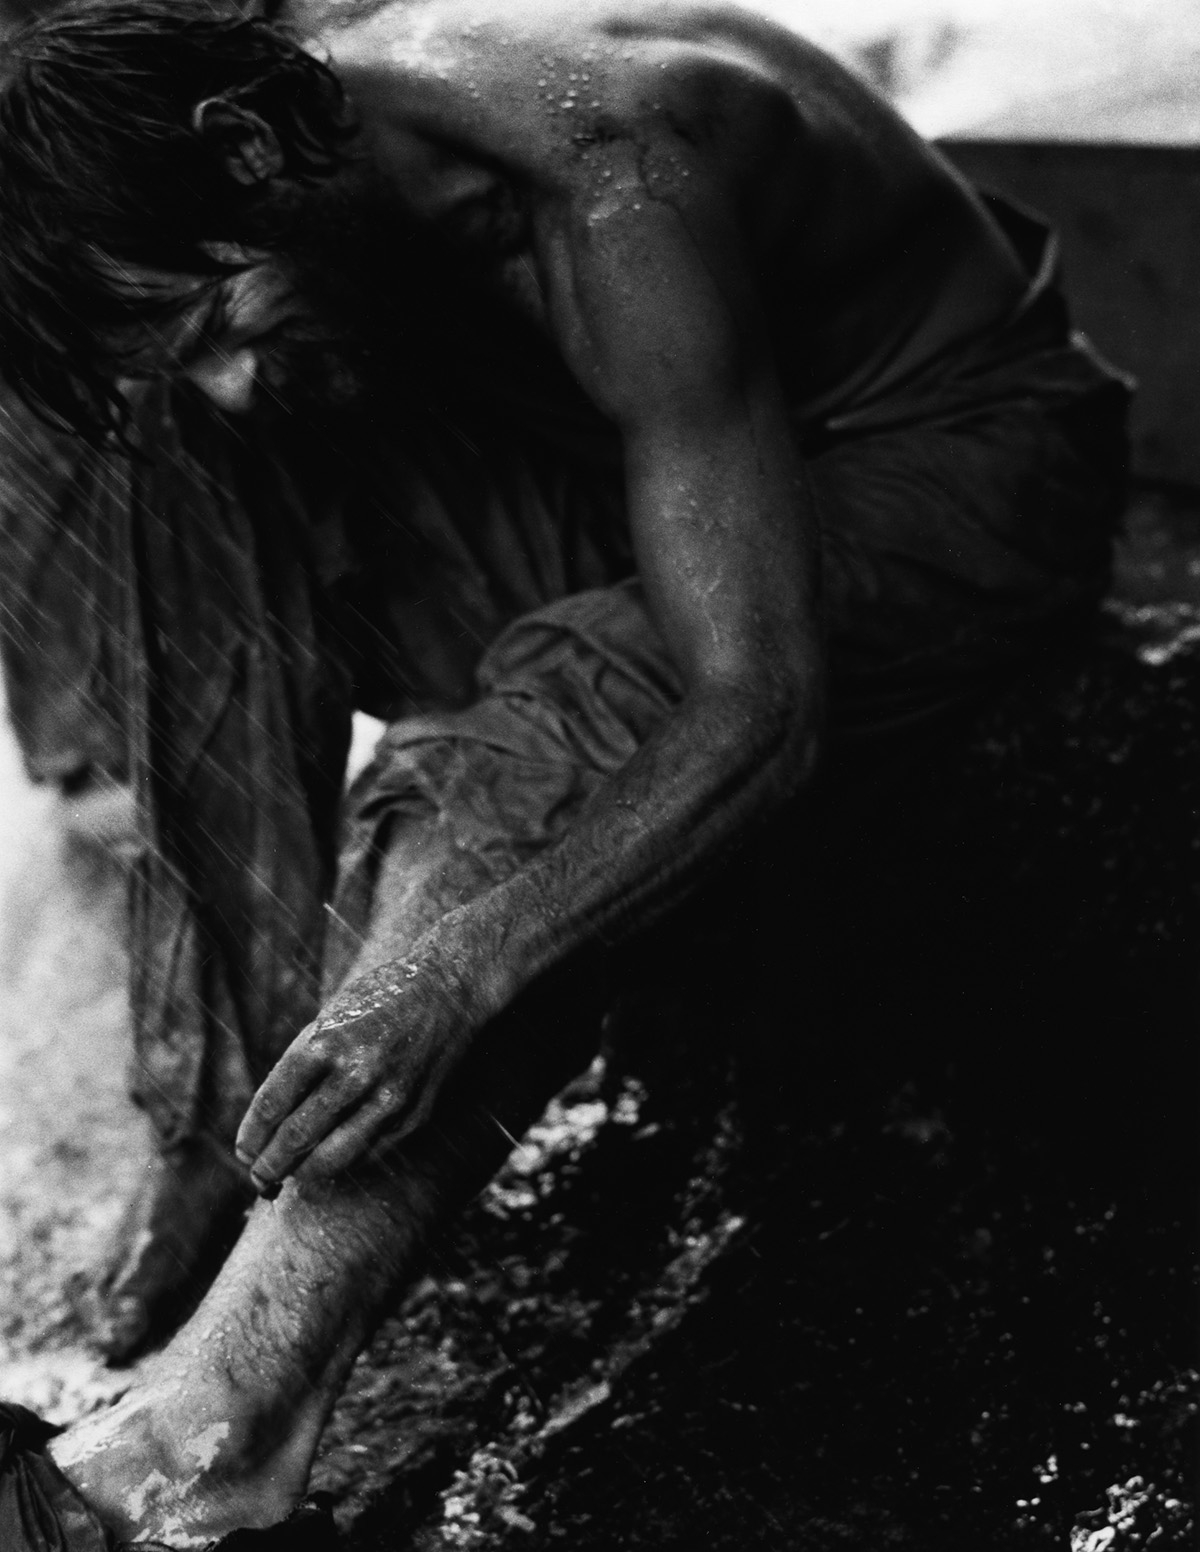 Black and white photo: A bare-chested man in heavy rain, upper body bent forward. He grabs his leg.